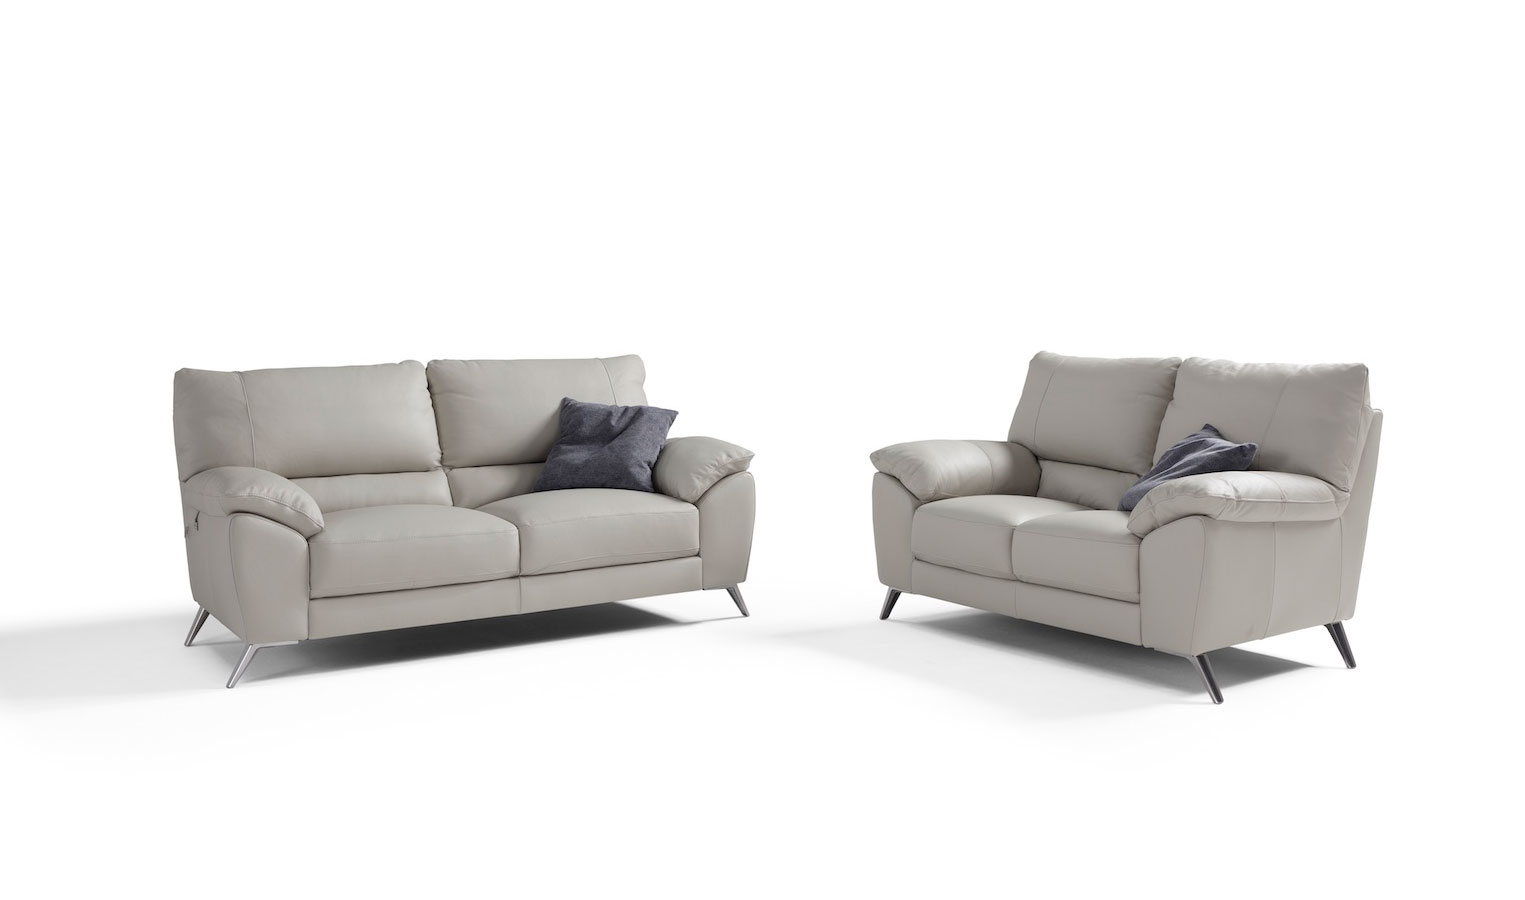 Envy 2 Seater Leather Sofa House Of